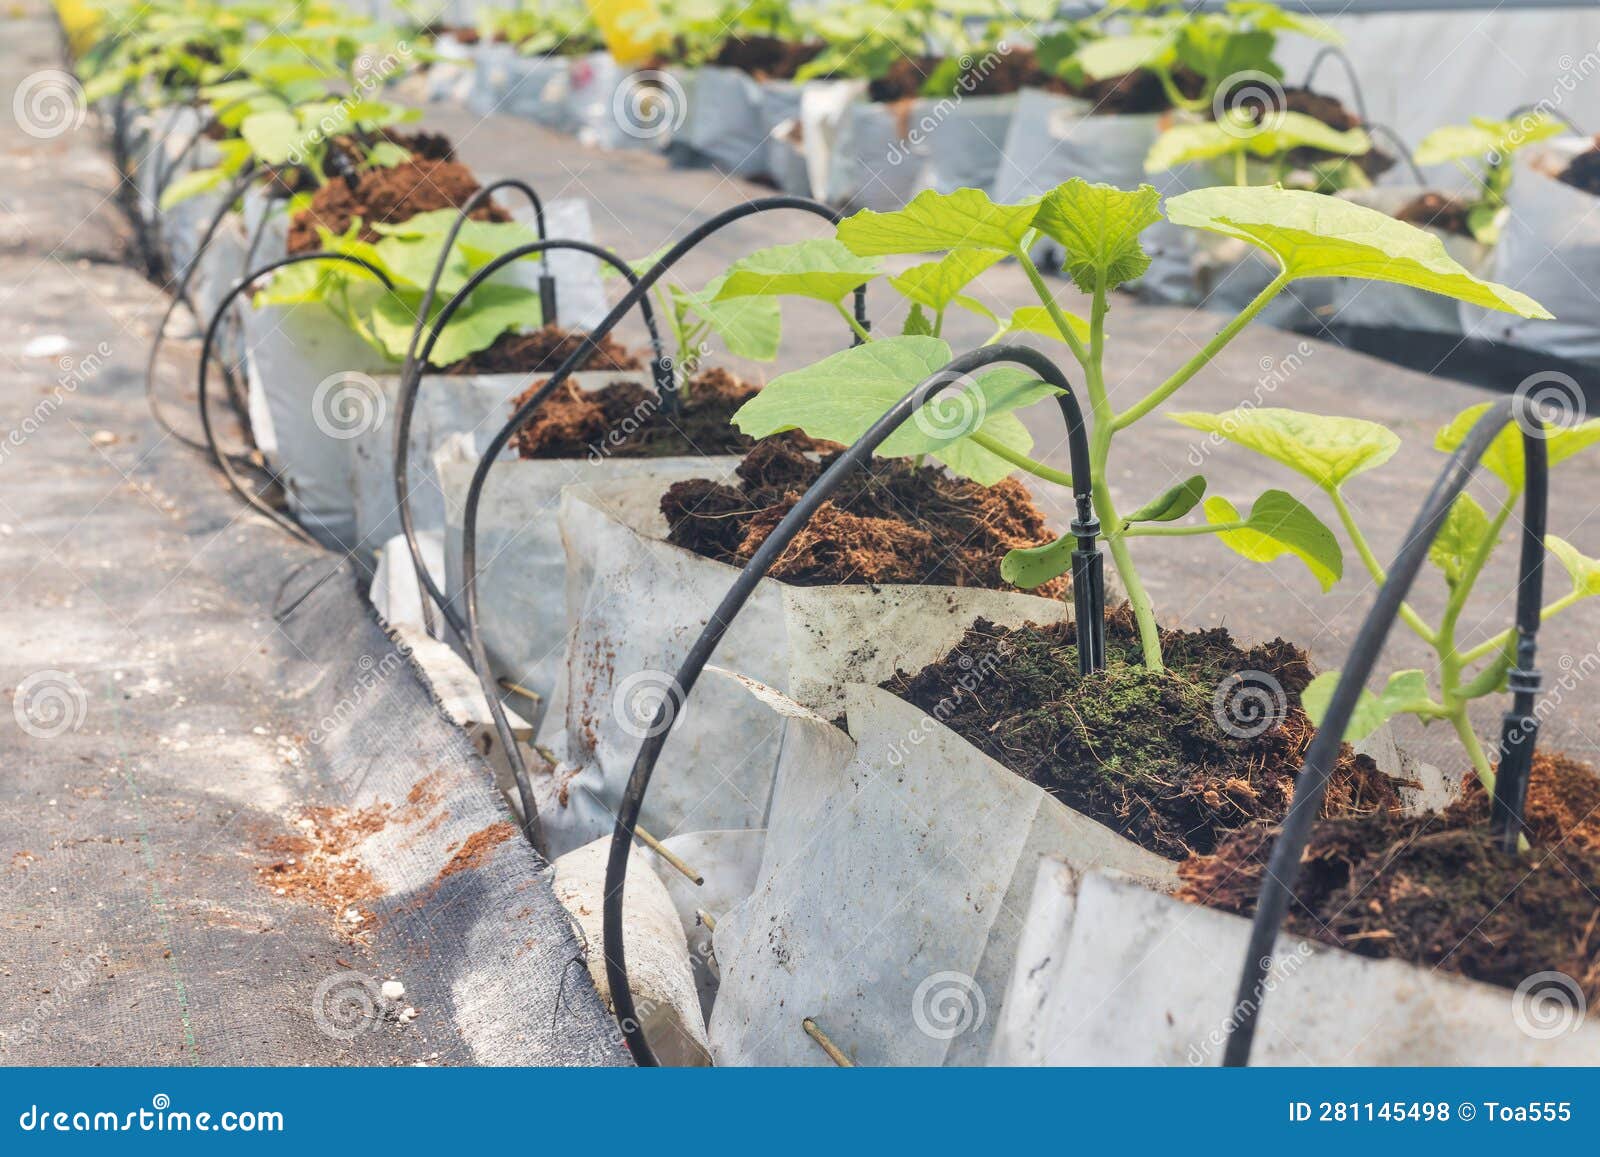 drip irrigation is an efficient way to irrigate greenhouse crops